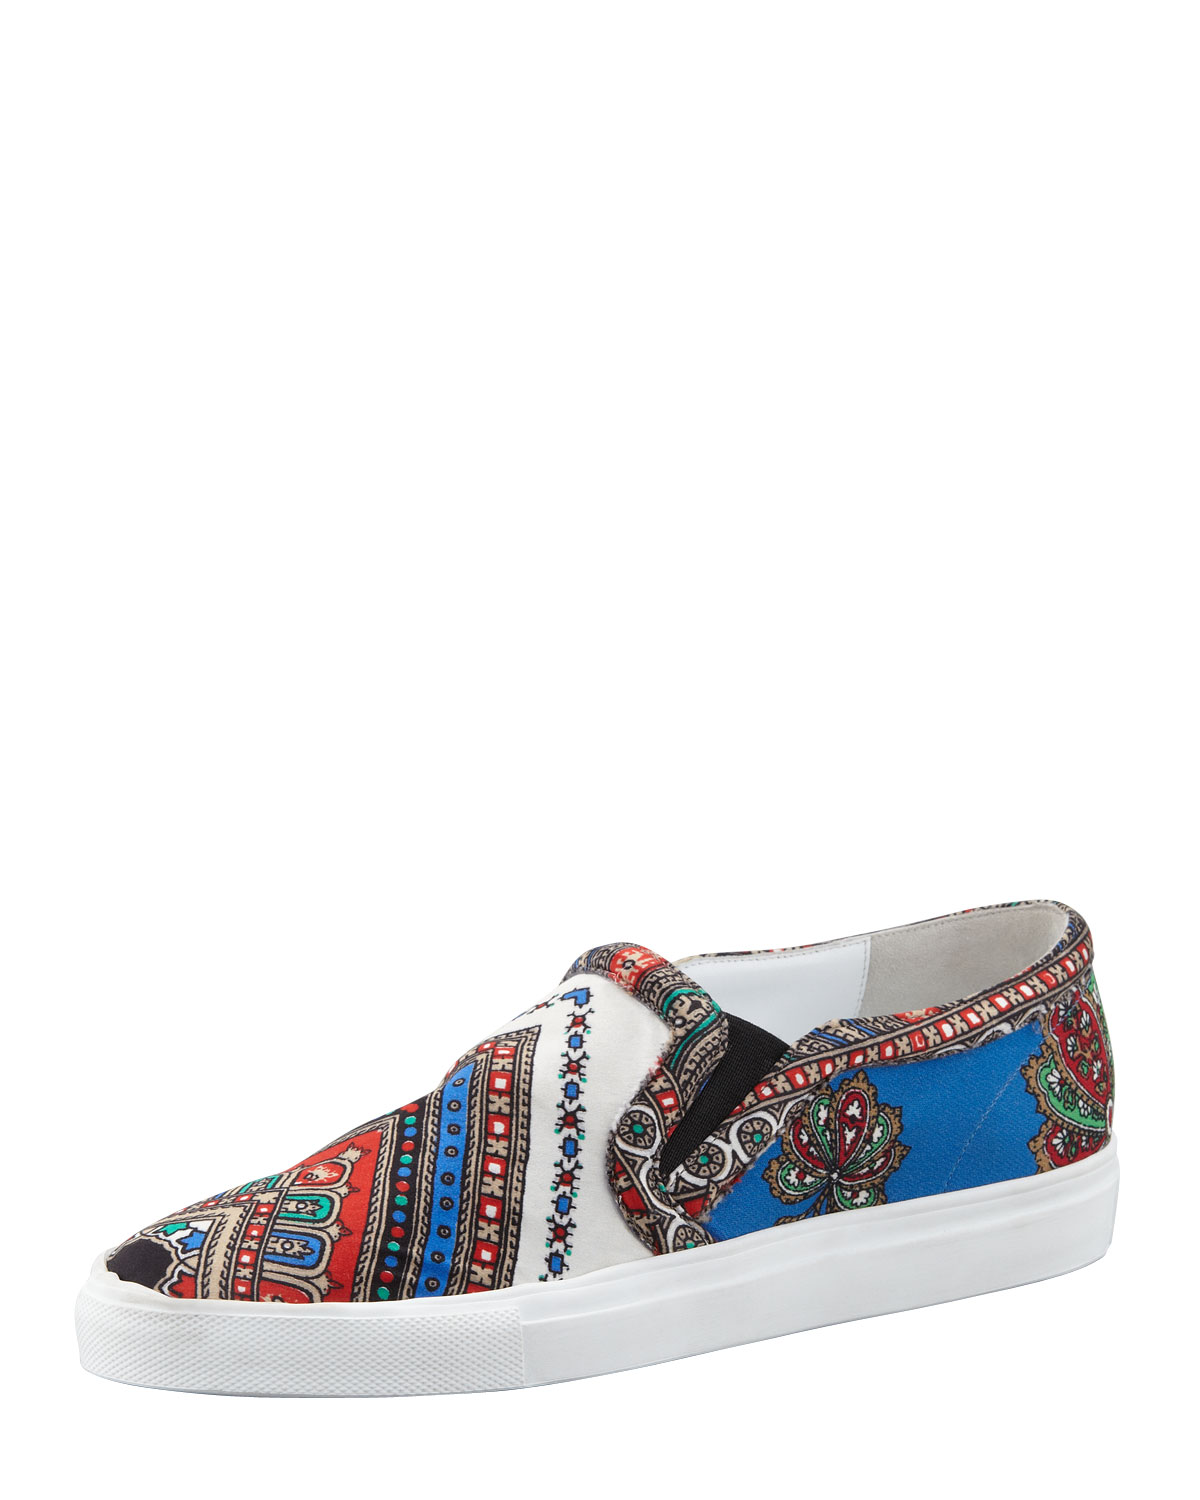 Givenchy “Fabric Print Sneaker” | //THE SUPER FRESH KIDS//